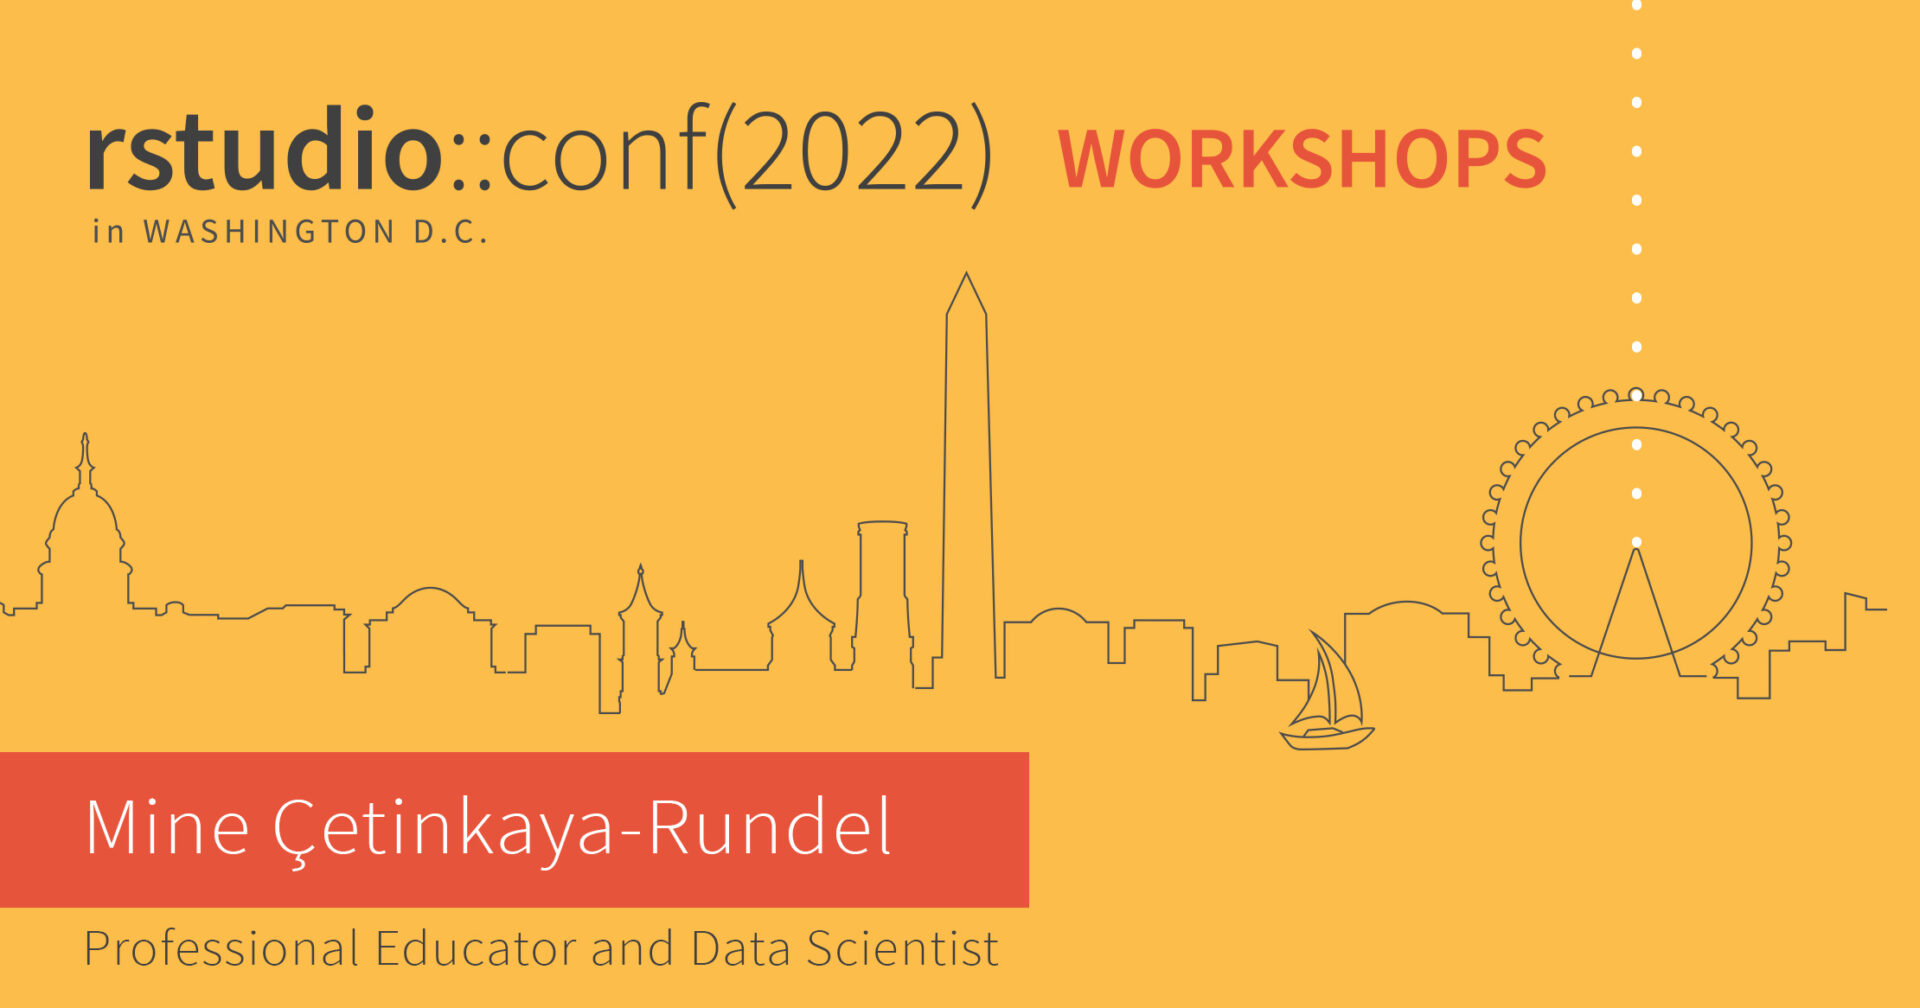 Yellow image with an outline of the National Harbor skyline and the words rstudio conf 2022 workshops in Washington DC, Mine Çetinkaya-Rundel Professional Educator and Data Scientist